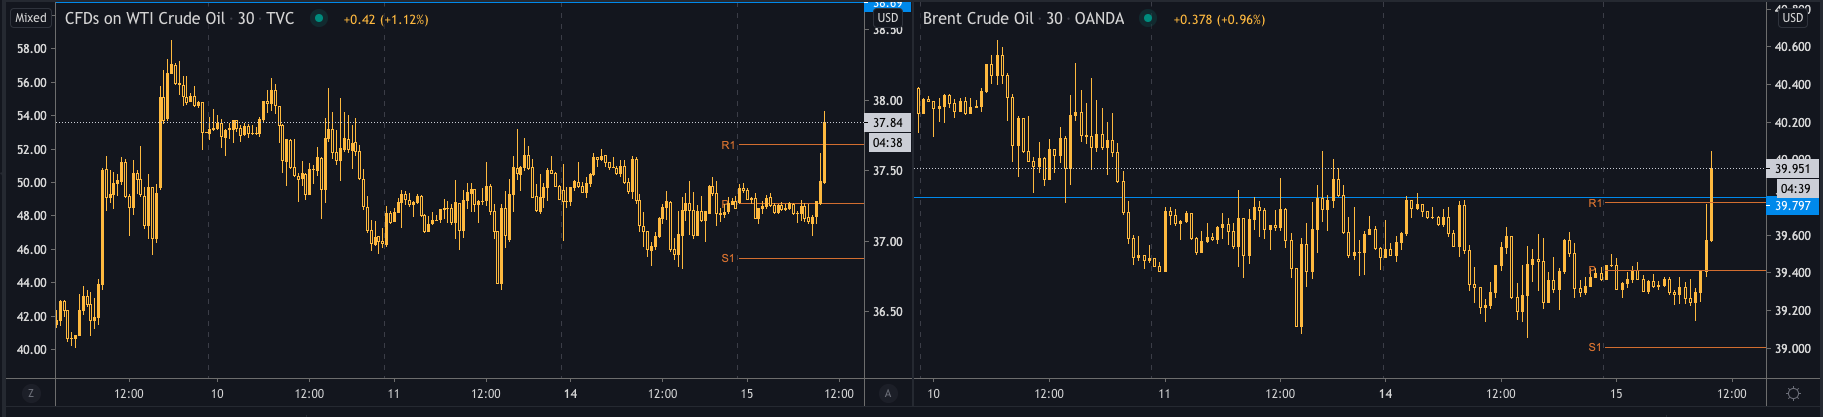 US oil and Brent Crude higher